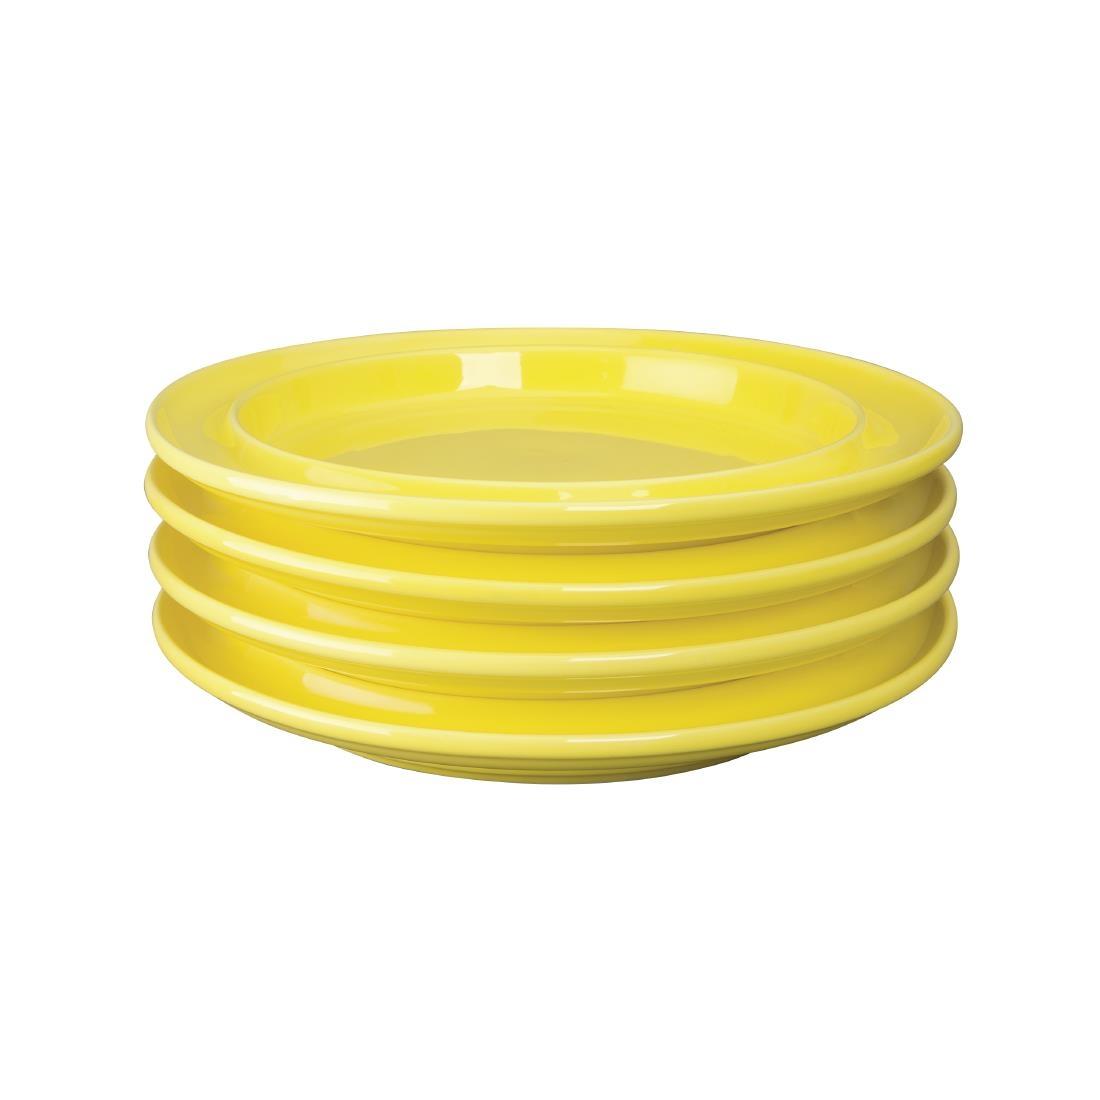 Olympia Heritage Raised Rim Plates Yellow 253mm (Pack of 4) - DW147  - 4